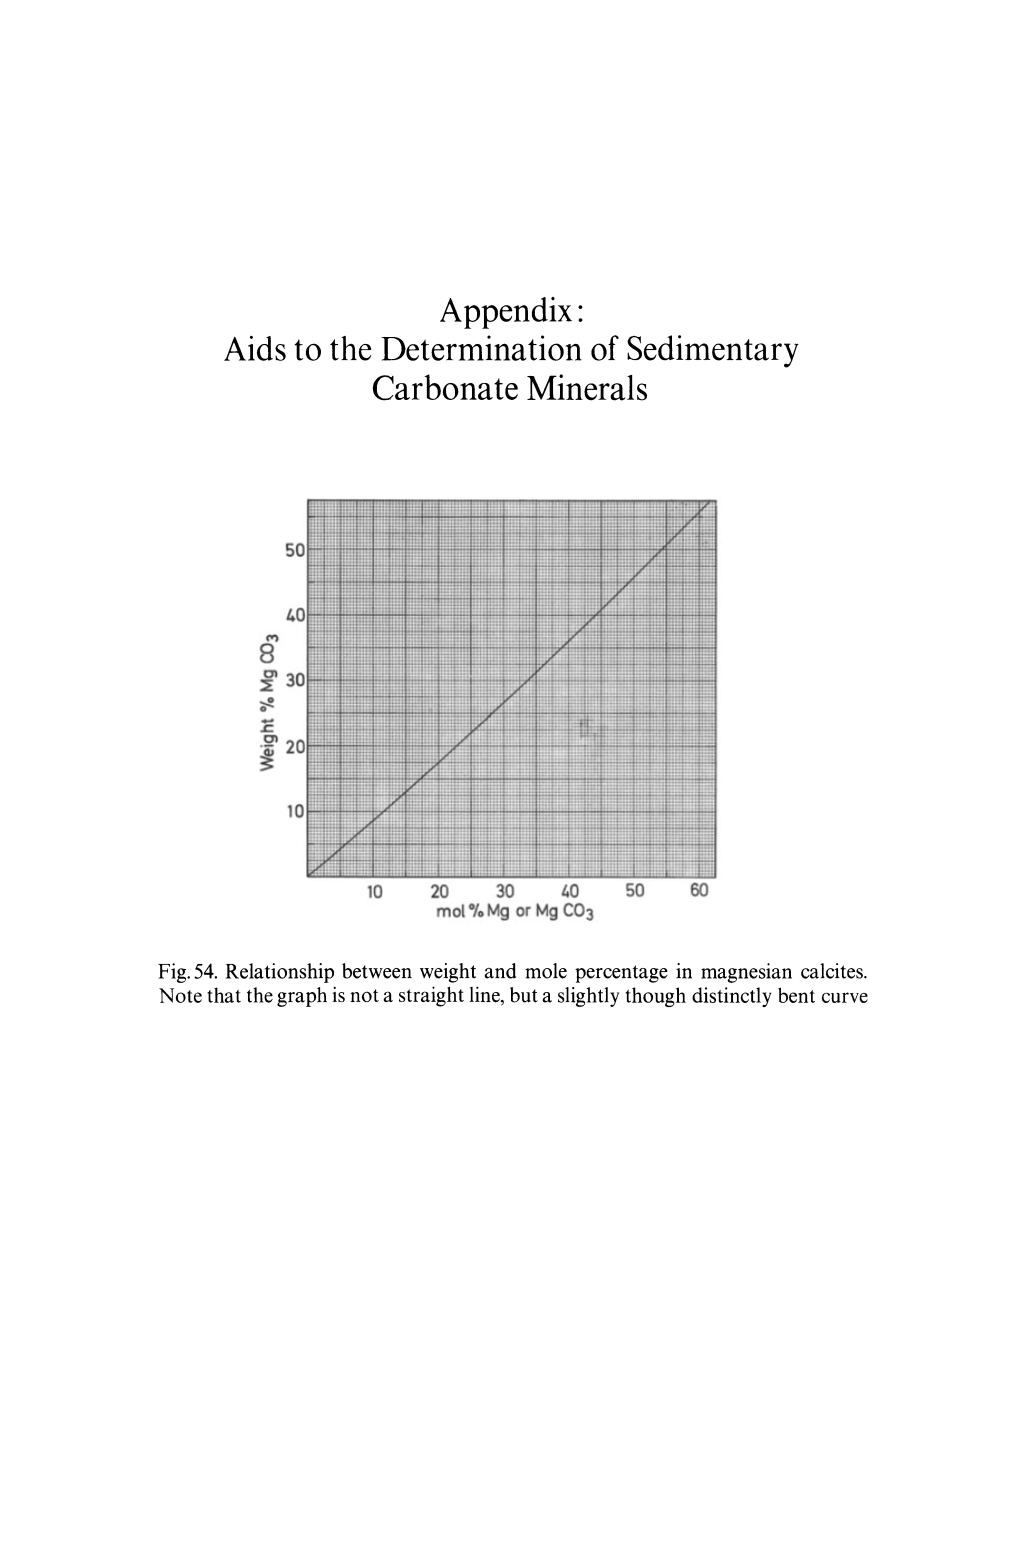 Appendix: Aids to the Determination of Sedimentary Carbonate Minerals